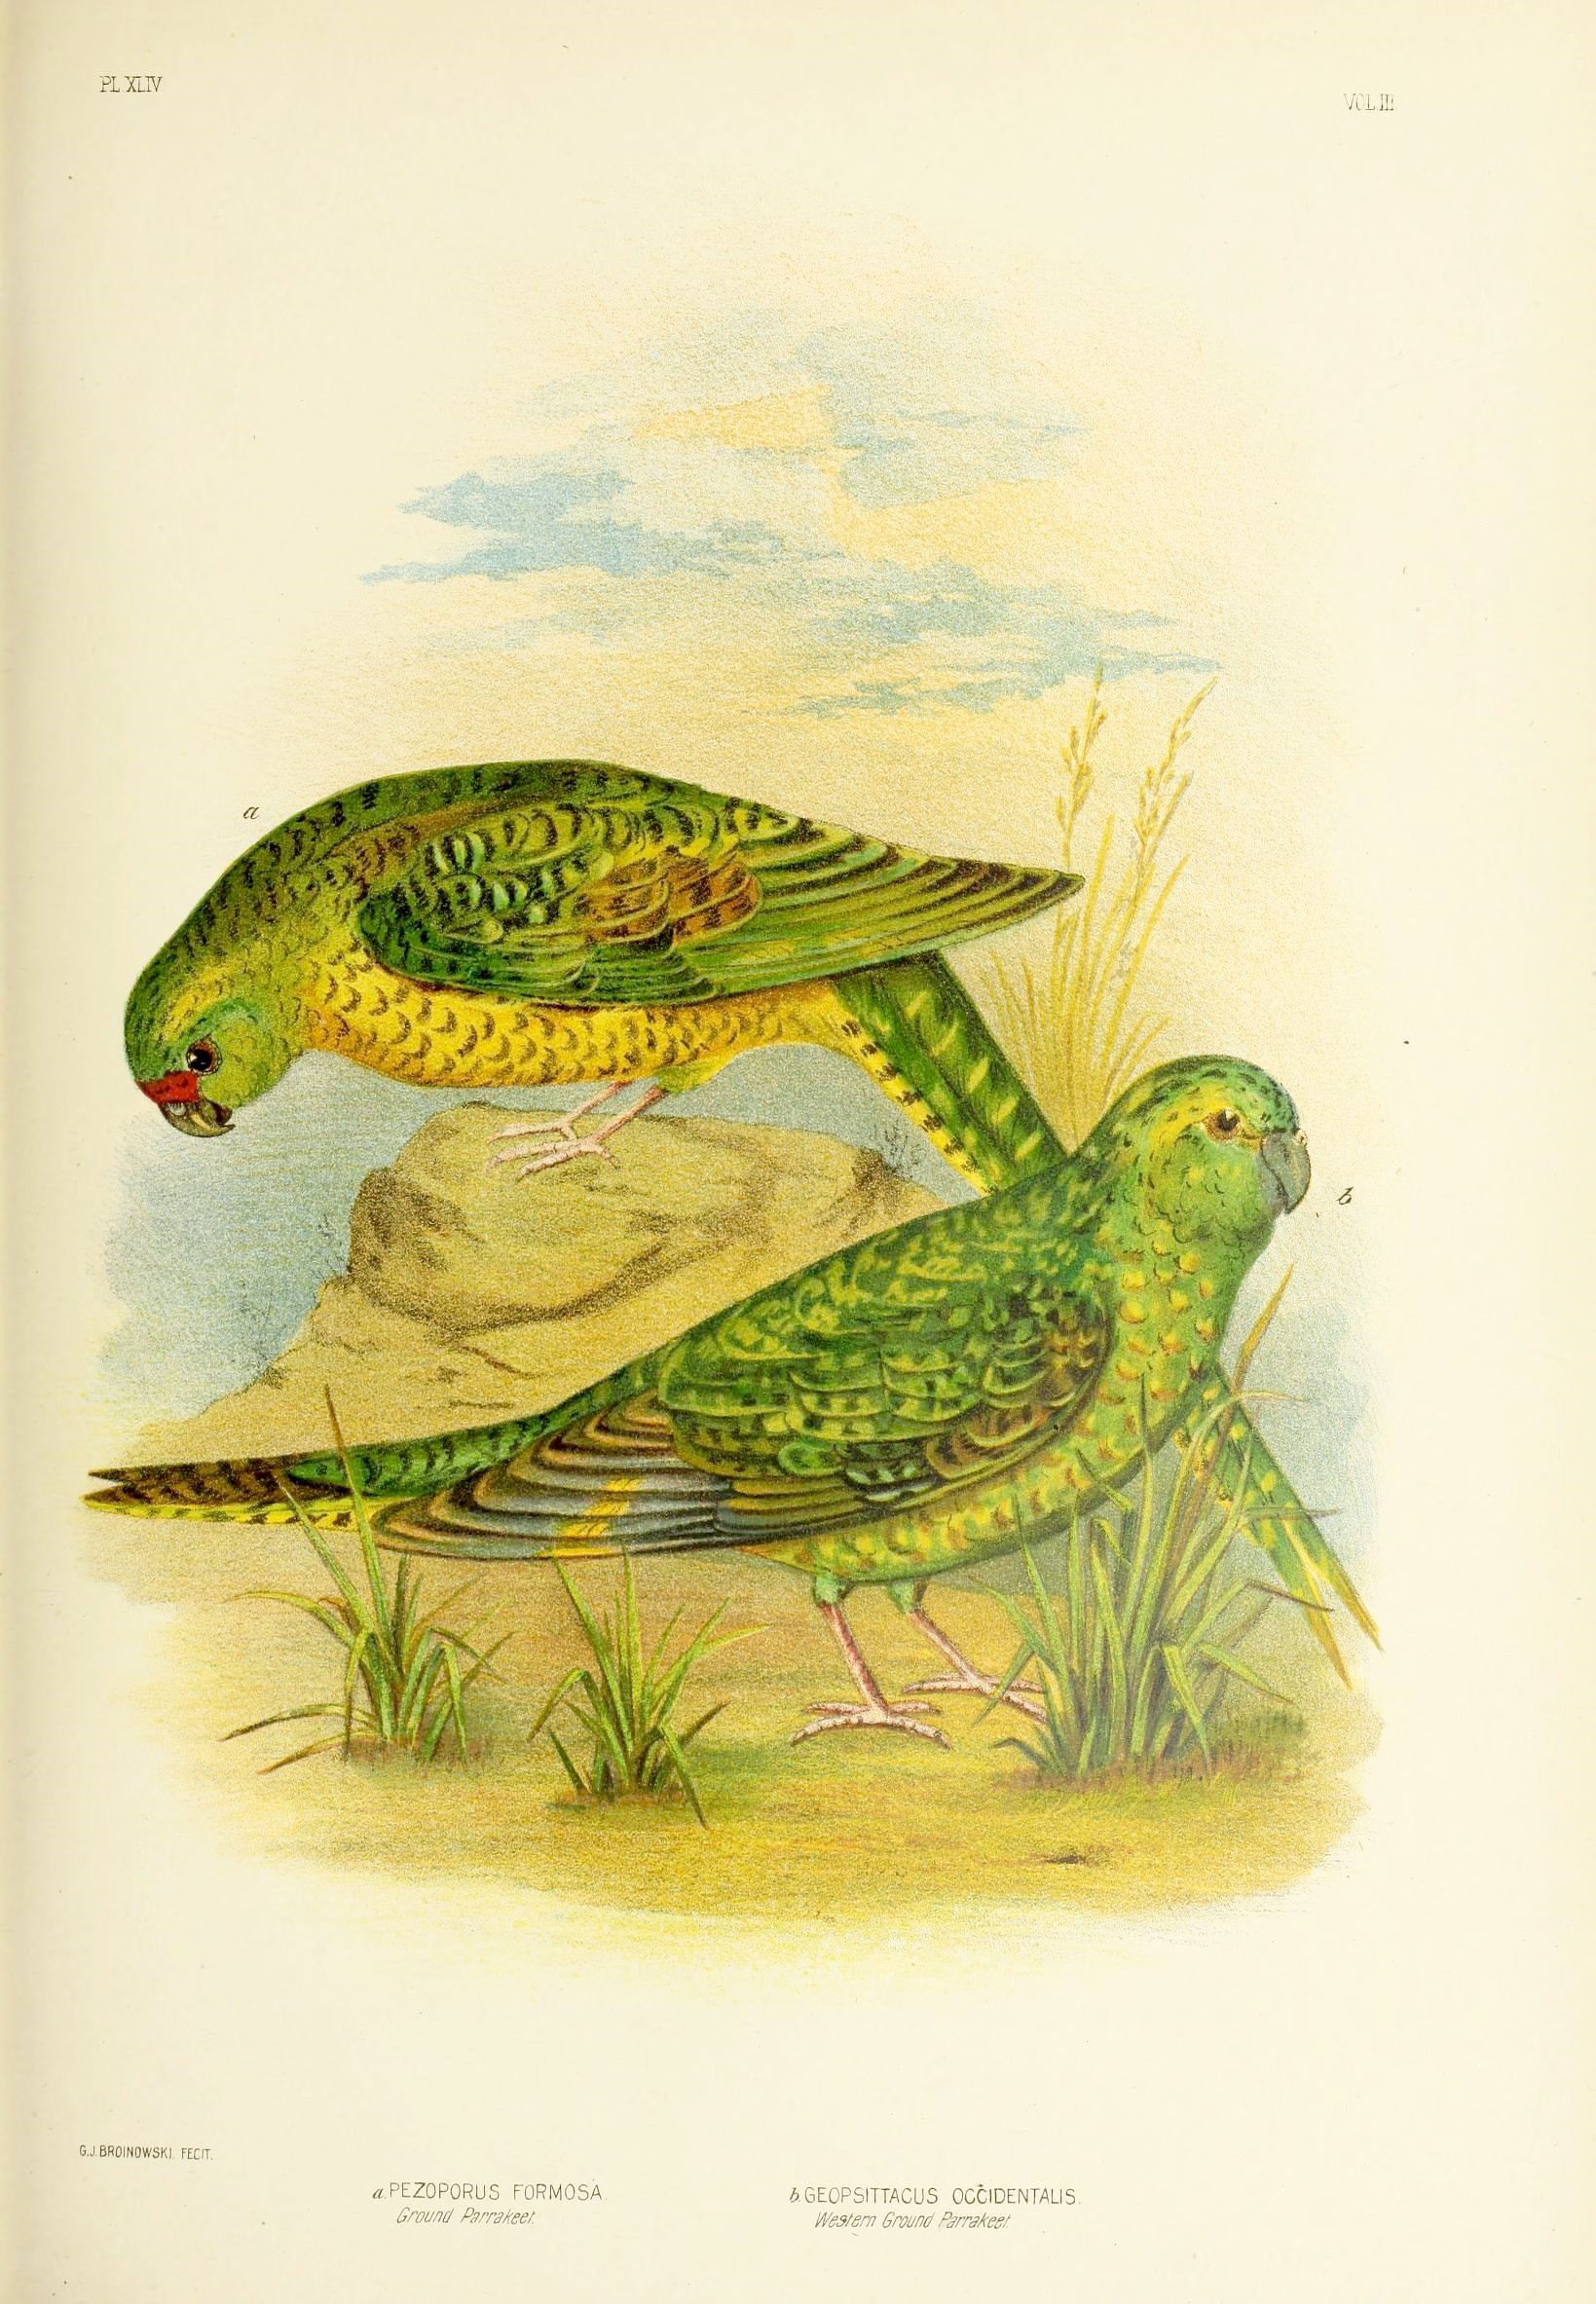 Night Parrots were rediscovered in 2013, a century after the last sighting of a living individual. Image courtesy of the Biodiversity Heritage Library via Creative Commons.